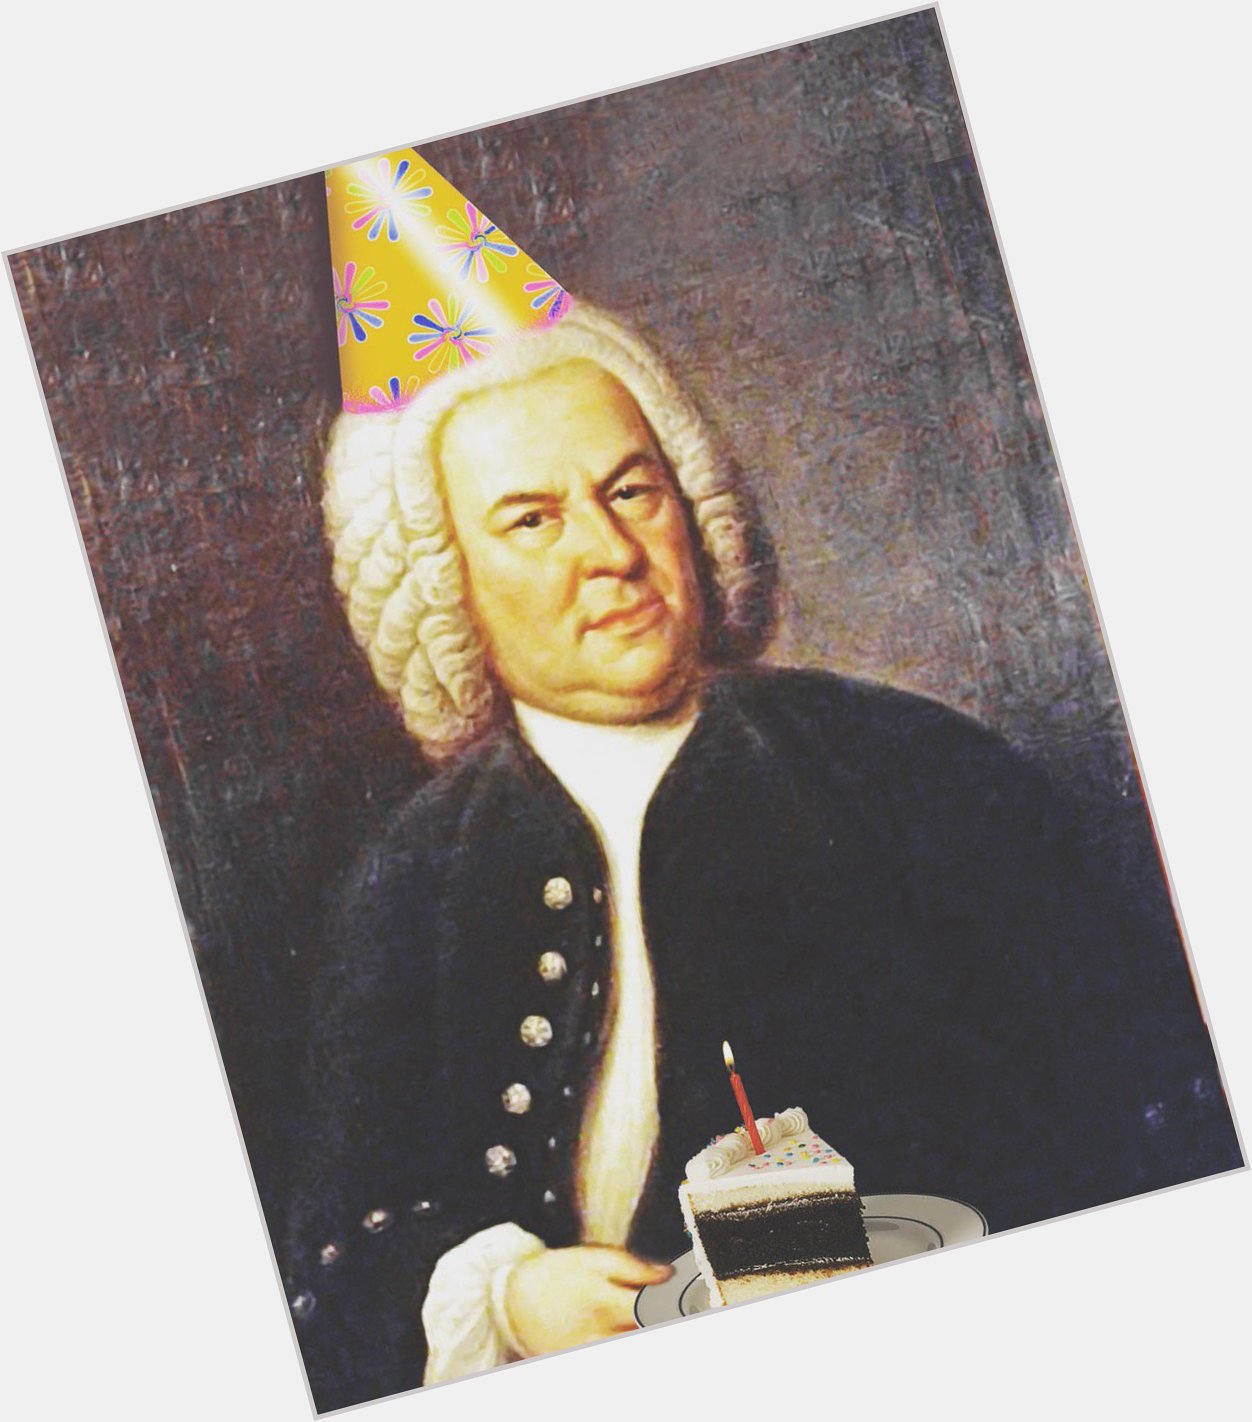 Happy birthday to Johann Sebastian Bach! What s your favorite work by Bach? 